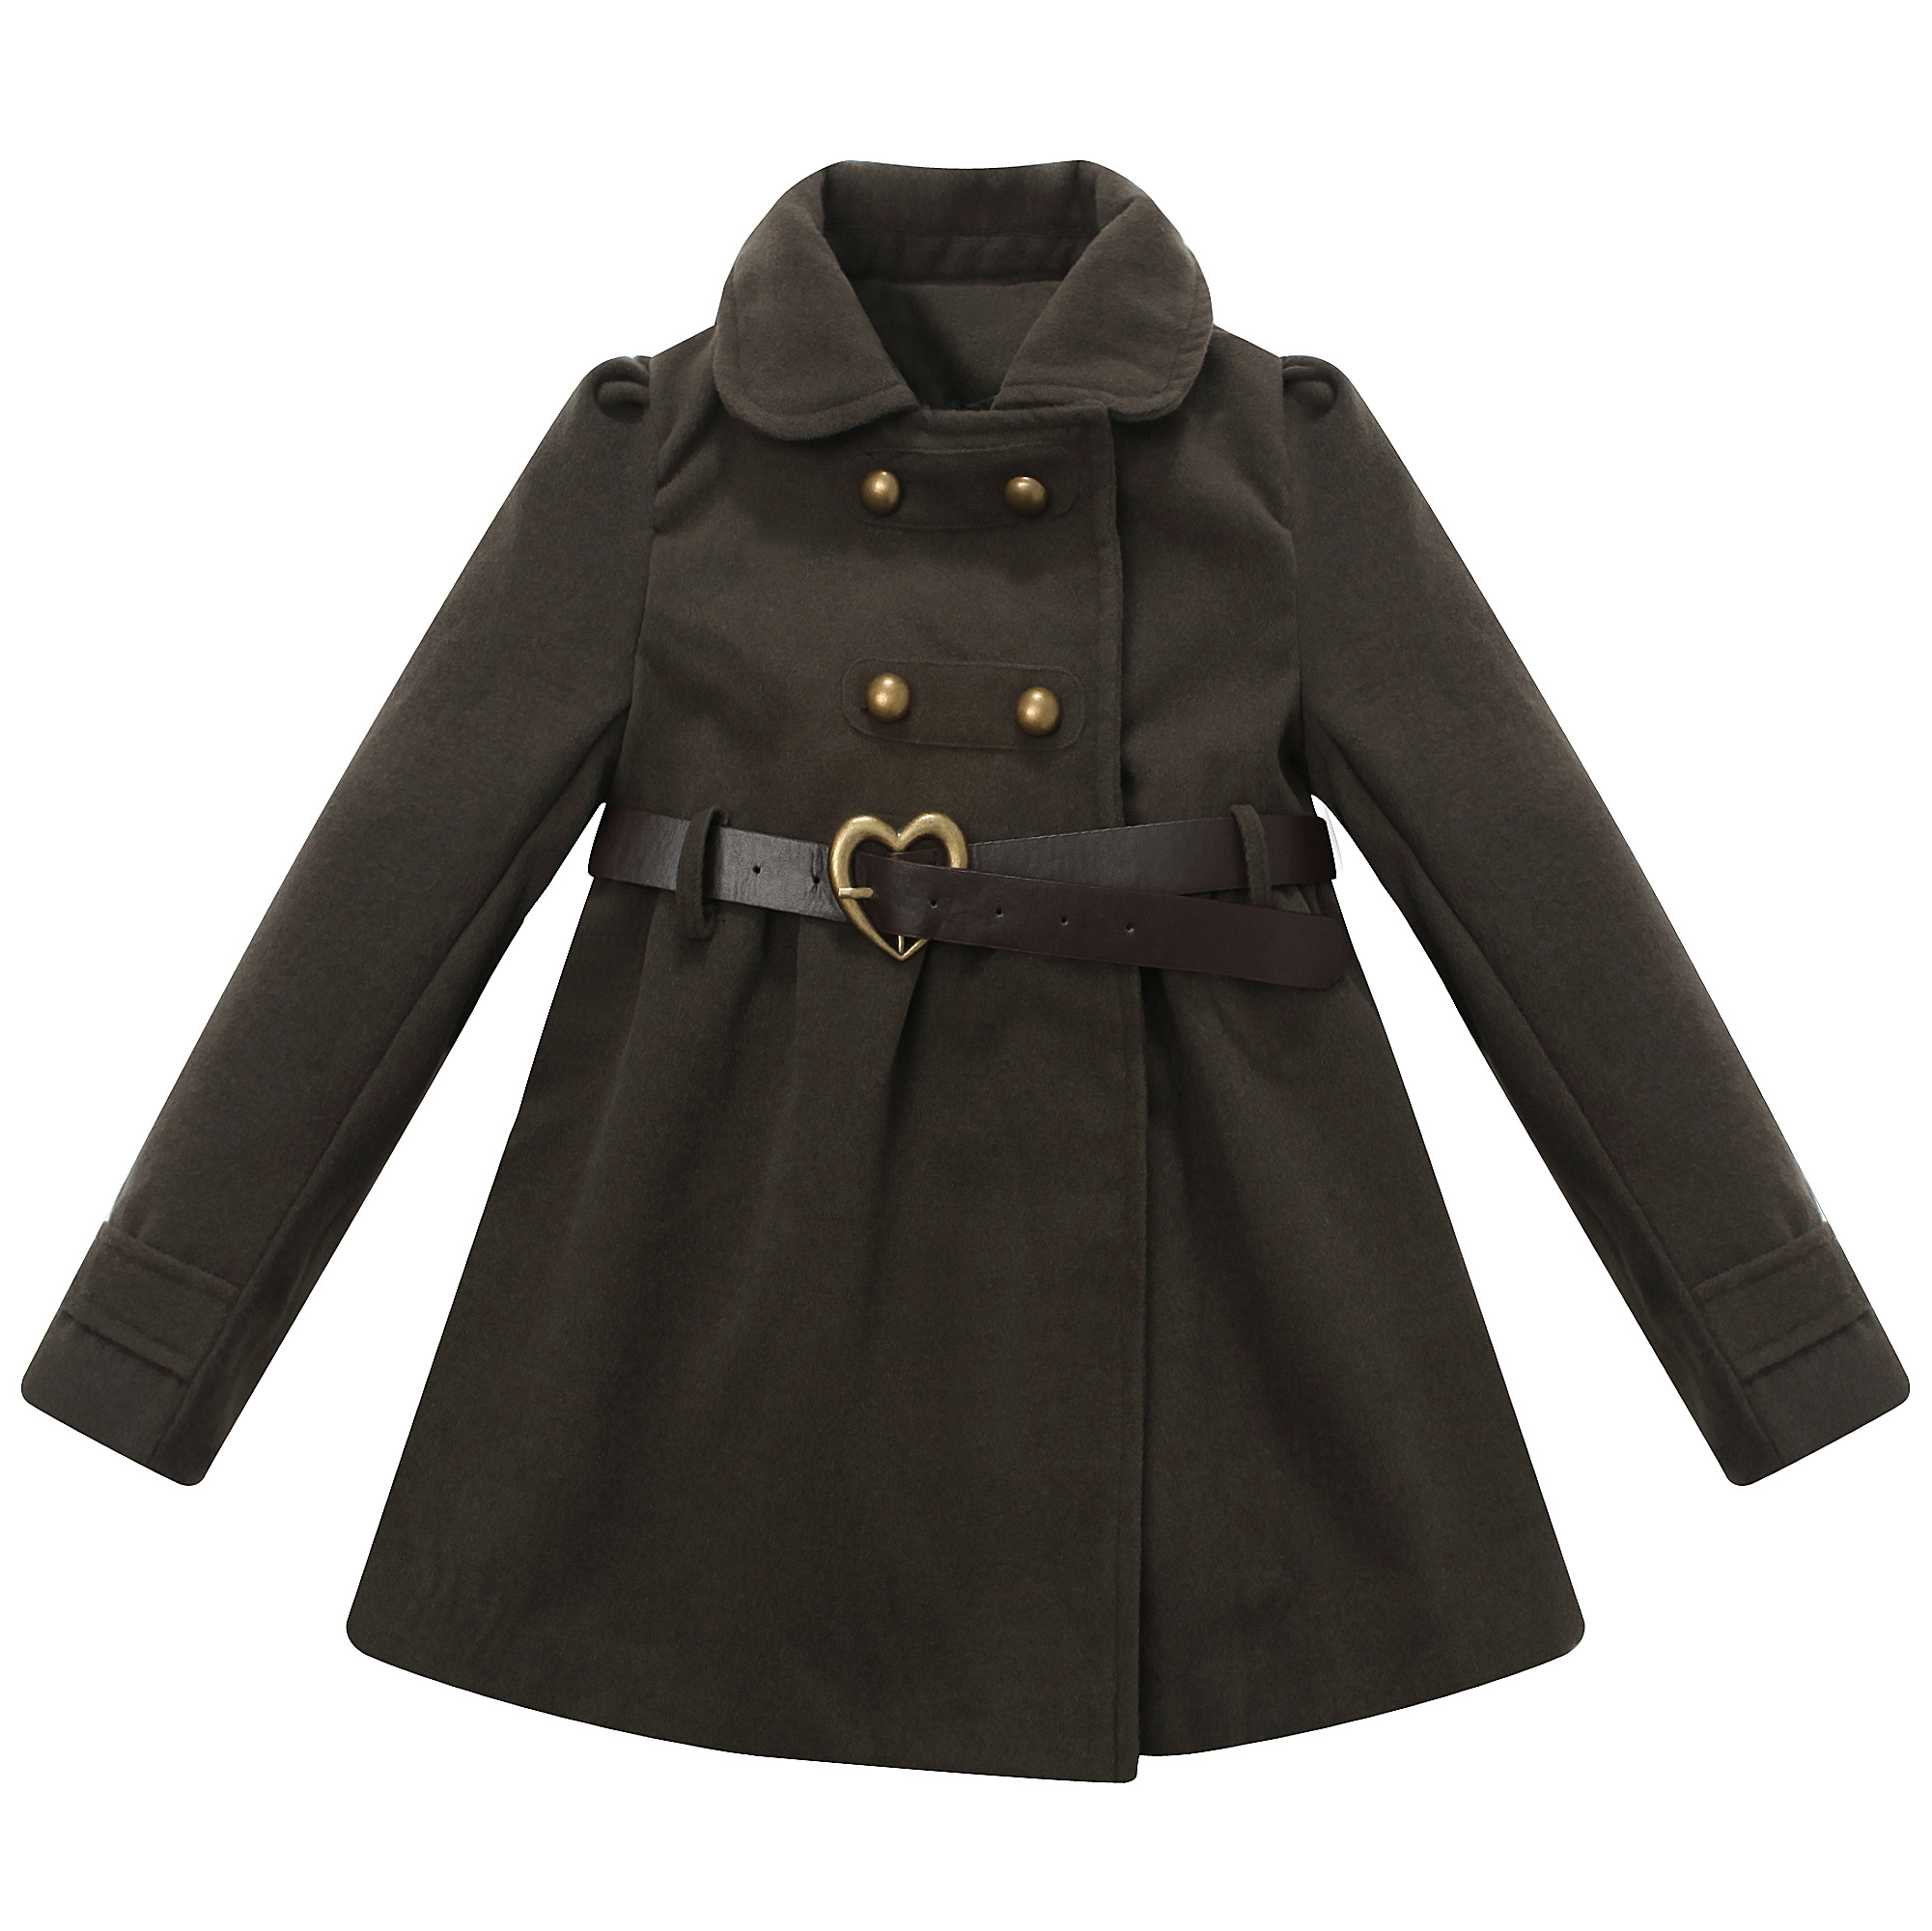 Richie House Girls' Jacket with Fake Leather Belt and Metal Snaps Closure RH1113 - image 1 of 2